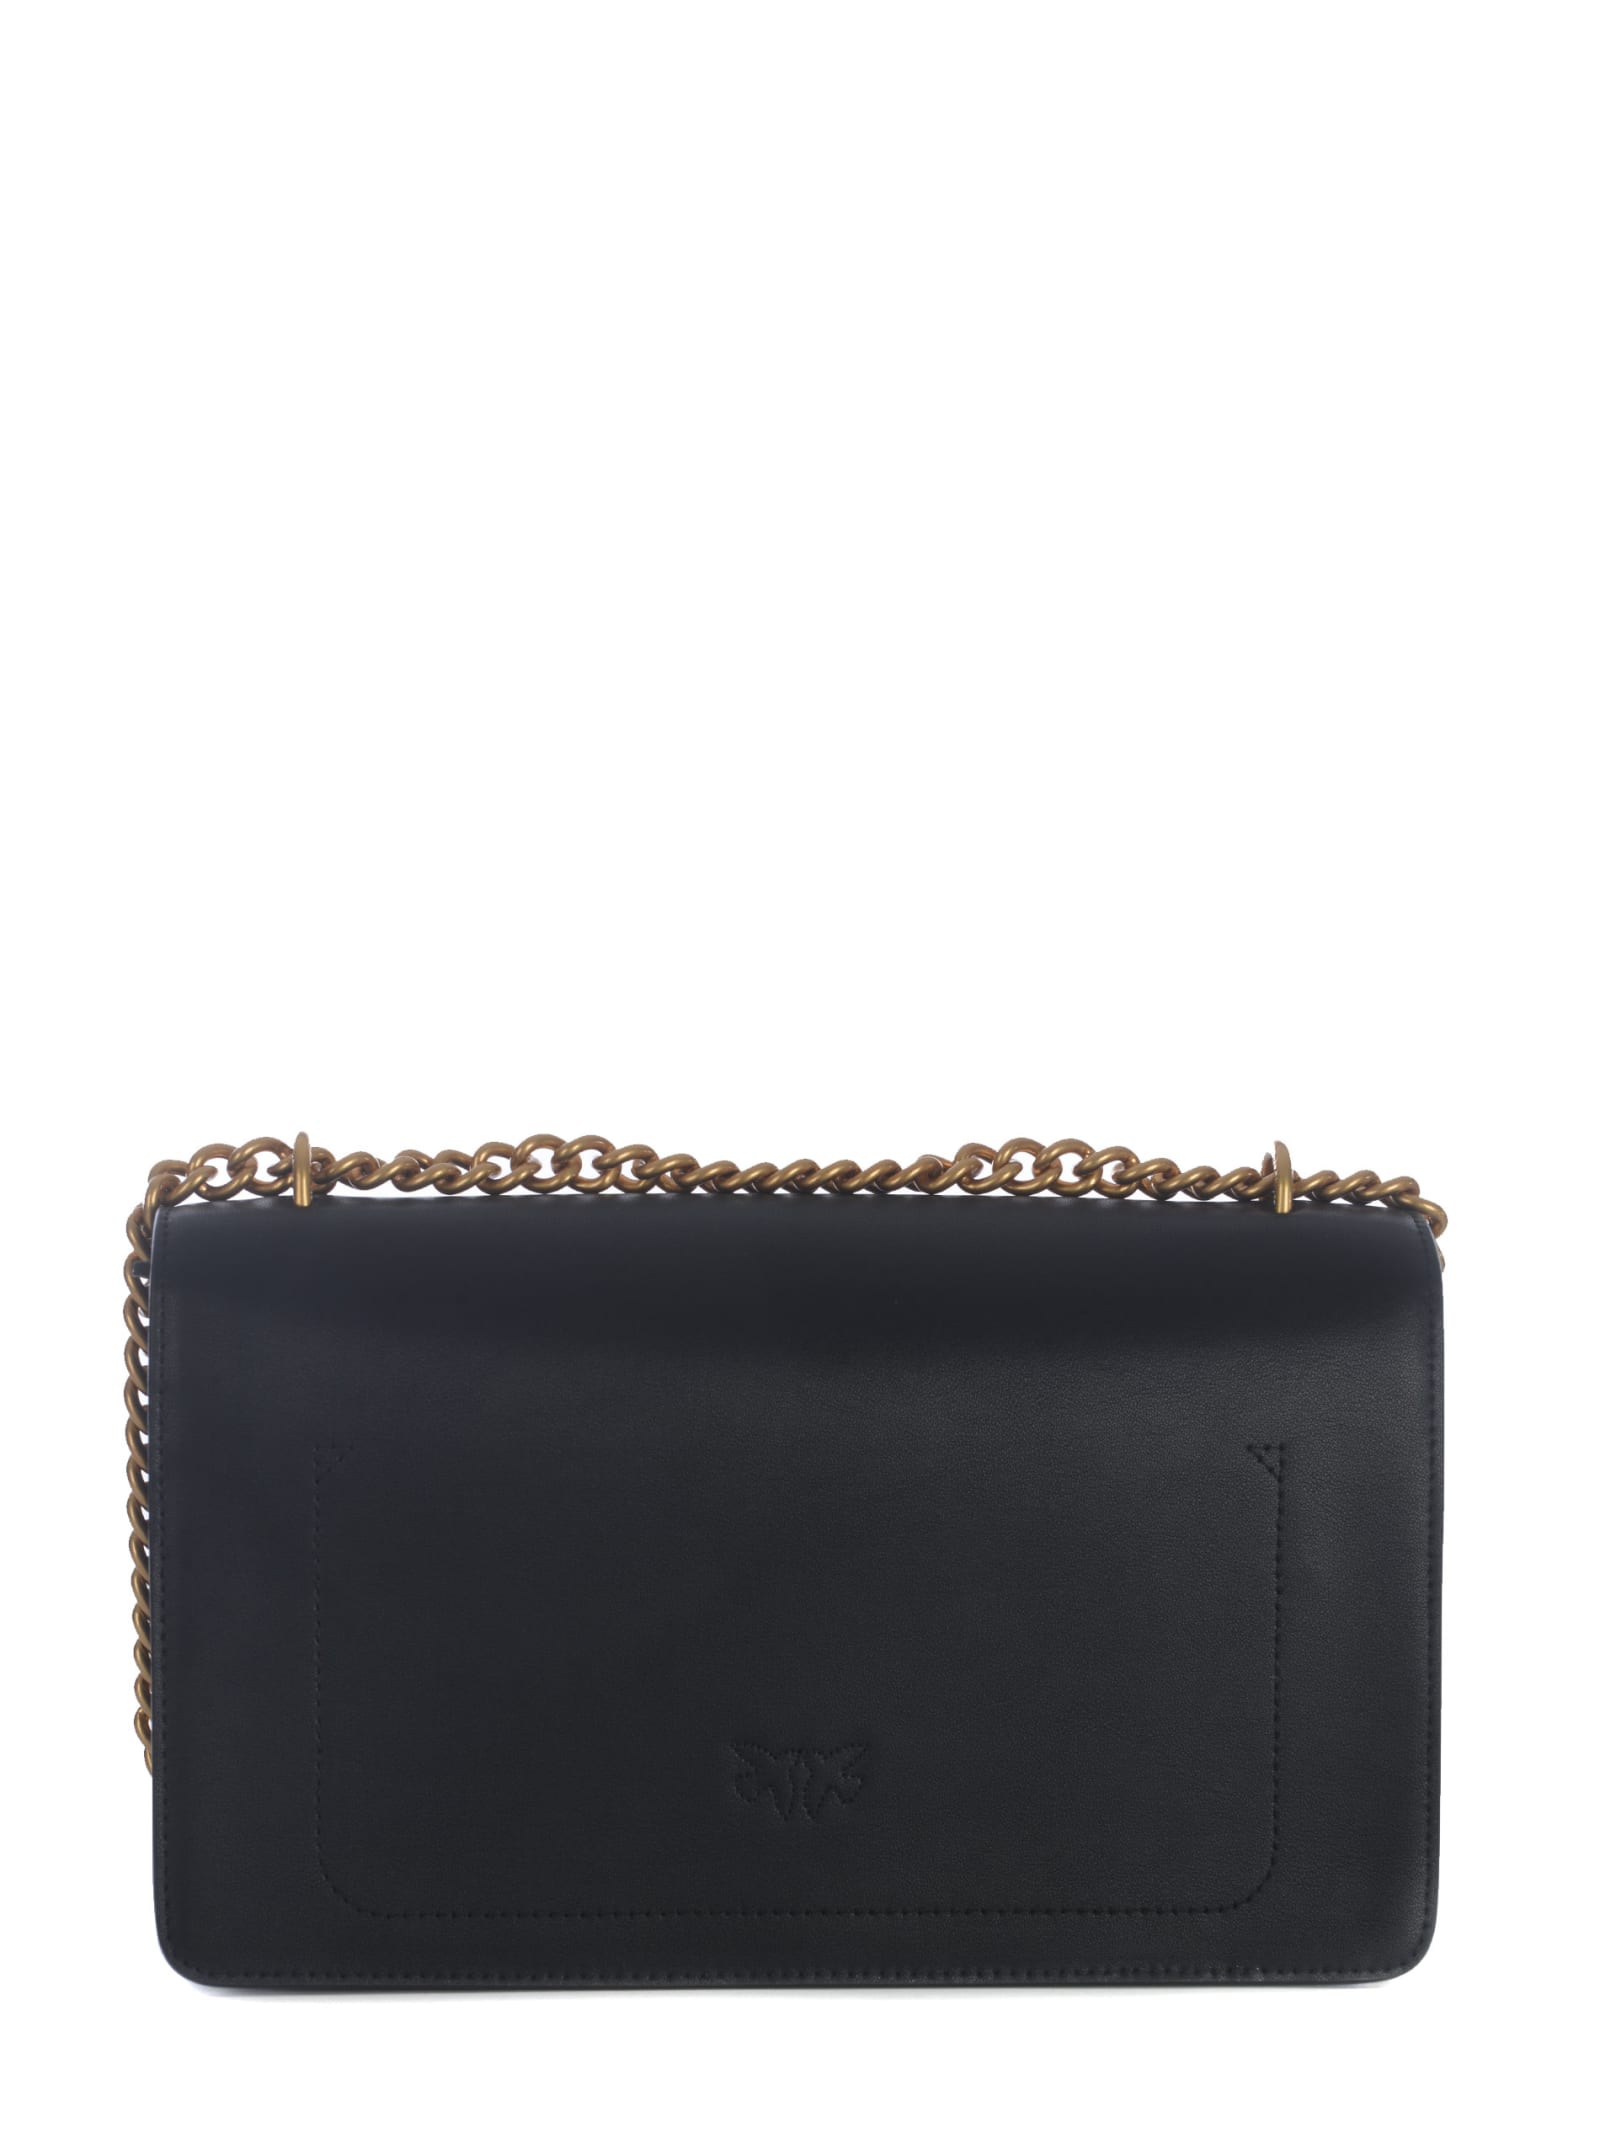 Shop Pinko Bag  Love One Classic Made Of Soft Leather In Nero Oro